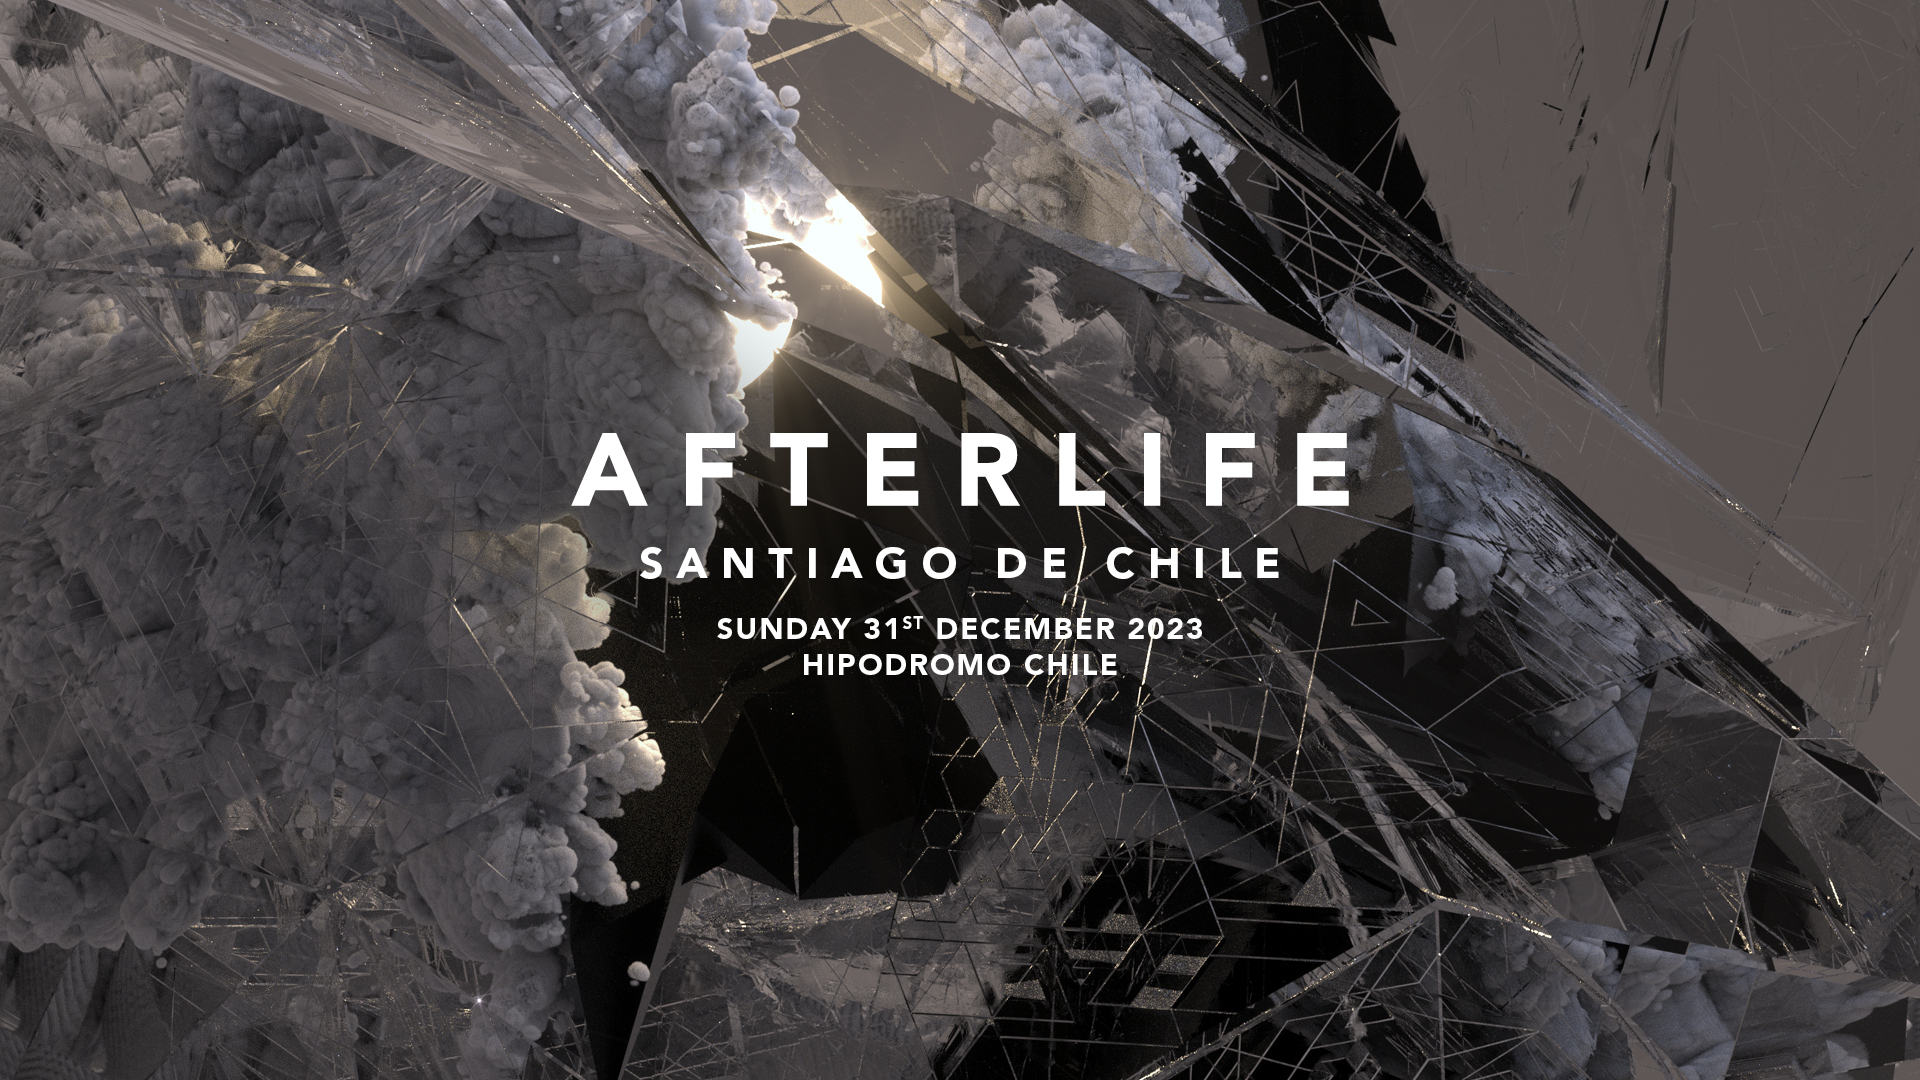 Tale of Us and Friends Captivate Los Angeles With Breathtaking West Coast  Debut of Afterlife -  - The Latest Electronic Dance Music News,  Reviews & Artists